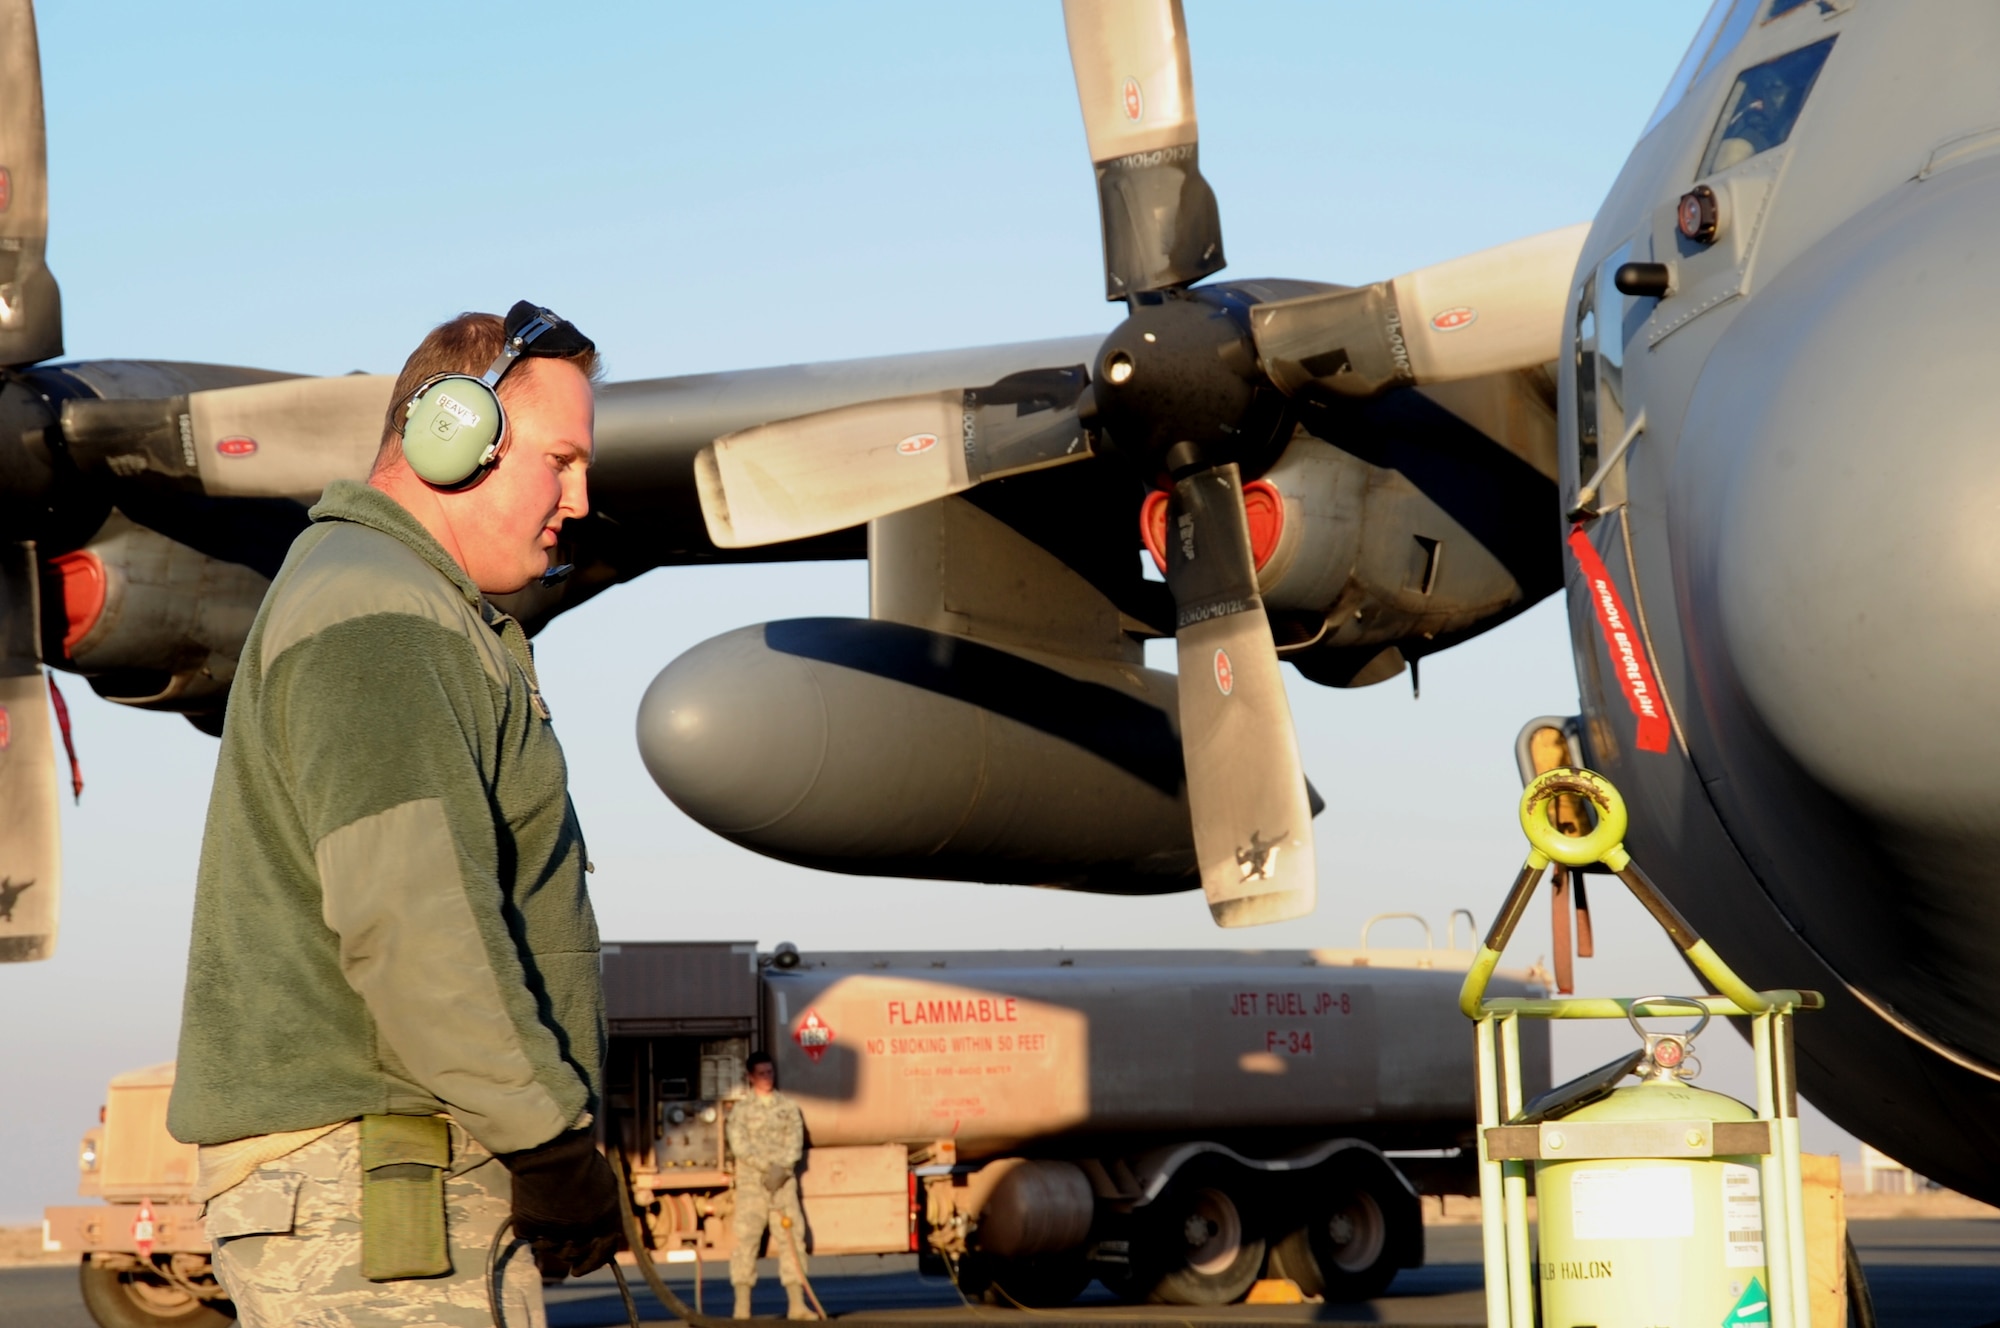 Staff Sgt. Michael Beaver, 737th Expeditionary Air Squadron crew chief, watches over a C-130 Hercules as it gets fueled Feb. 8, 2017 at an undisclosed location in Southwest Asia. The mission of the 737th is to deliver personnel and cargo downrange in support of Operation Inherent Resolve. (U.S. Air Force photo/Tech. Sgt. Kenneth McCann)